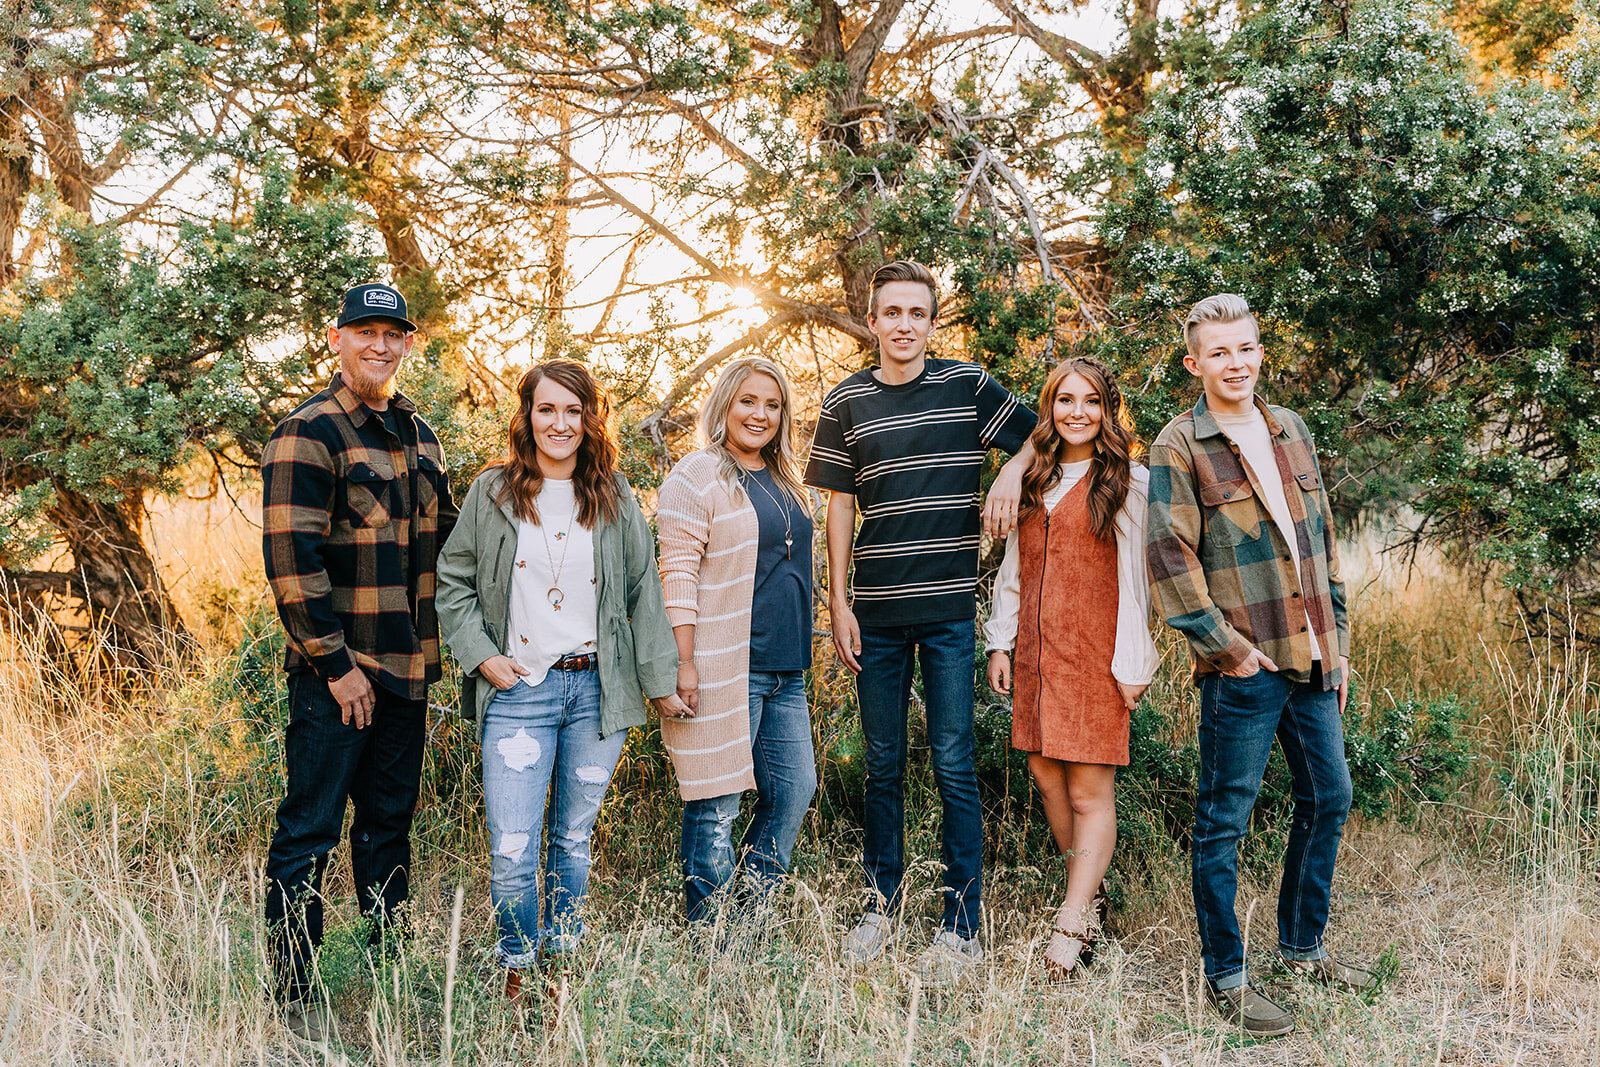  group shot commercial photos for clothing boutique posed photoshoot with multiple models men’s and women’s clothing available online and in tremonton utah at the physical storefront commercial photography by bella alder photography available in cach